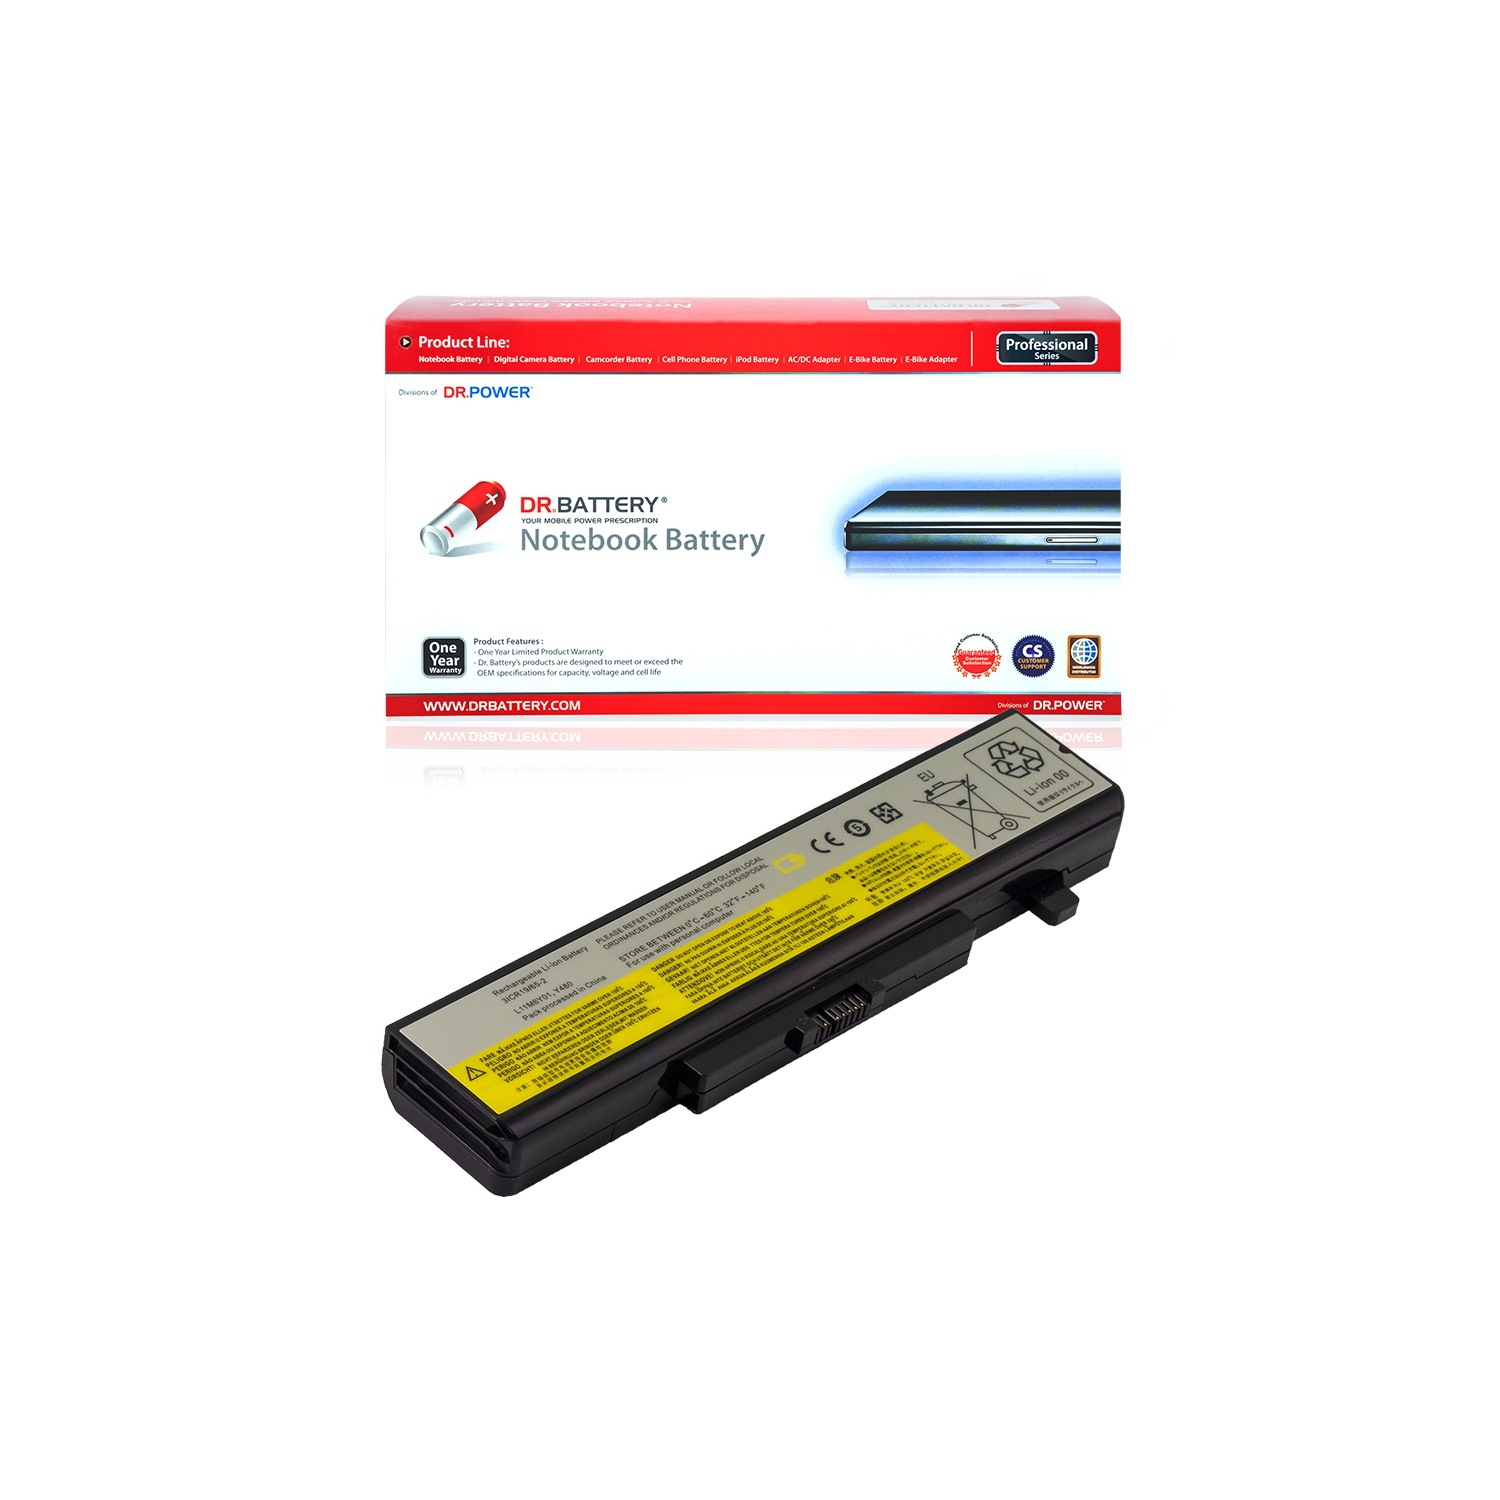 DR. BATTERY - Replacement for Lenovo Essential B590 / G480 / G485 / G580 / G585 / 0B58693 / 121500047 / 121500048 / 121500049